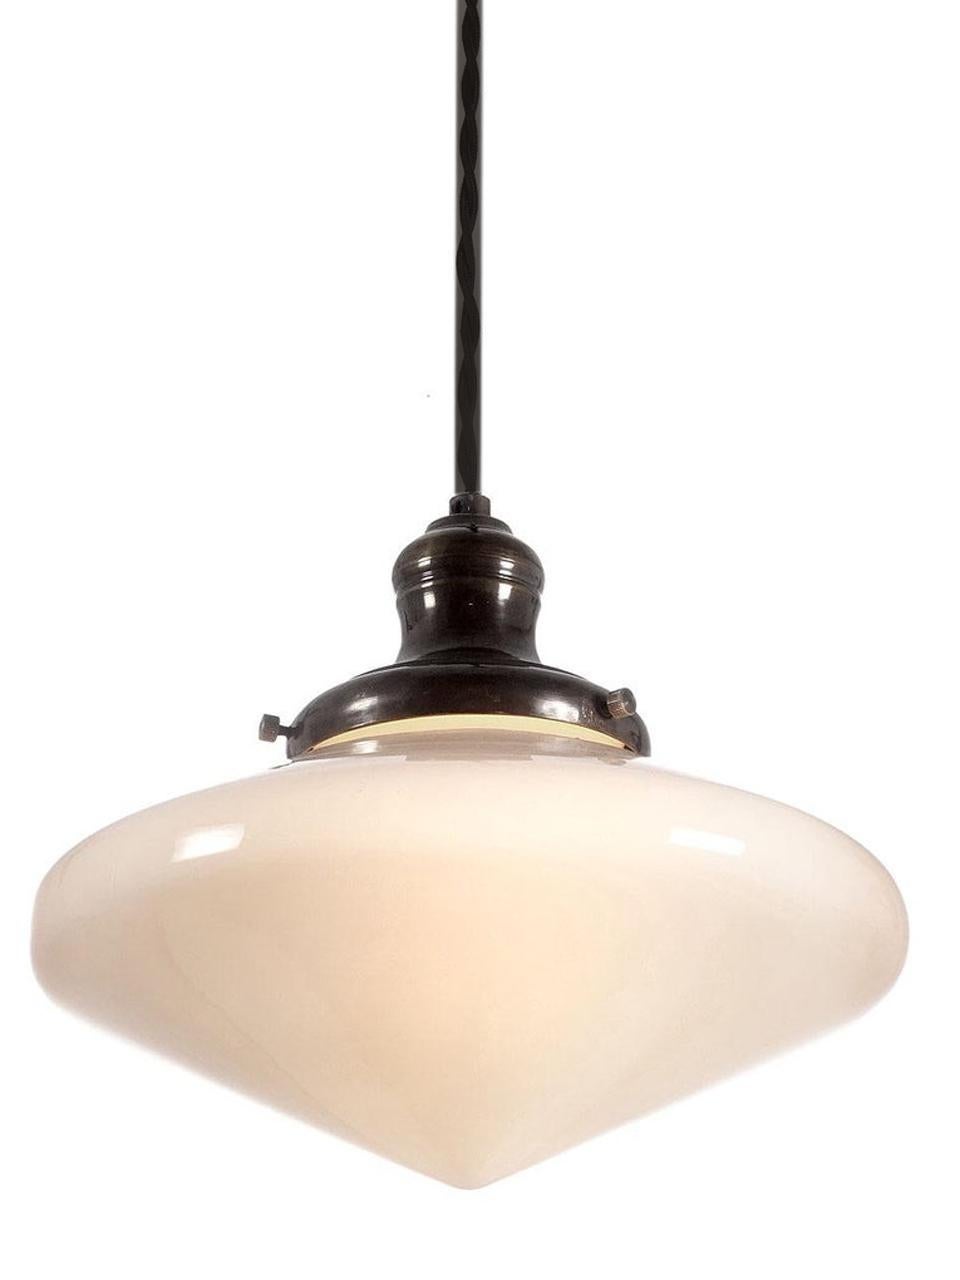 The look is both Art Deco and midcentury. What I like about these shades are the very useable size. The diameter is only 9.75 inches. It is white milk glass and the shade takes on the hue of the bulb used. It gives a nice pleasing glow with no